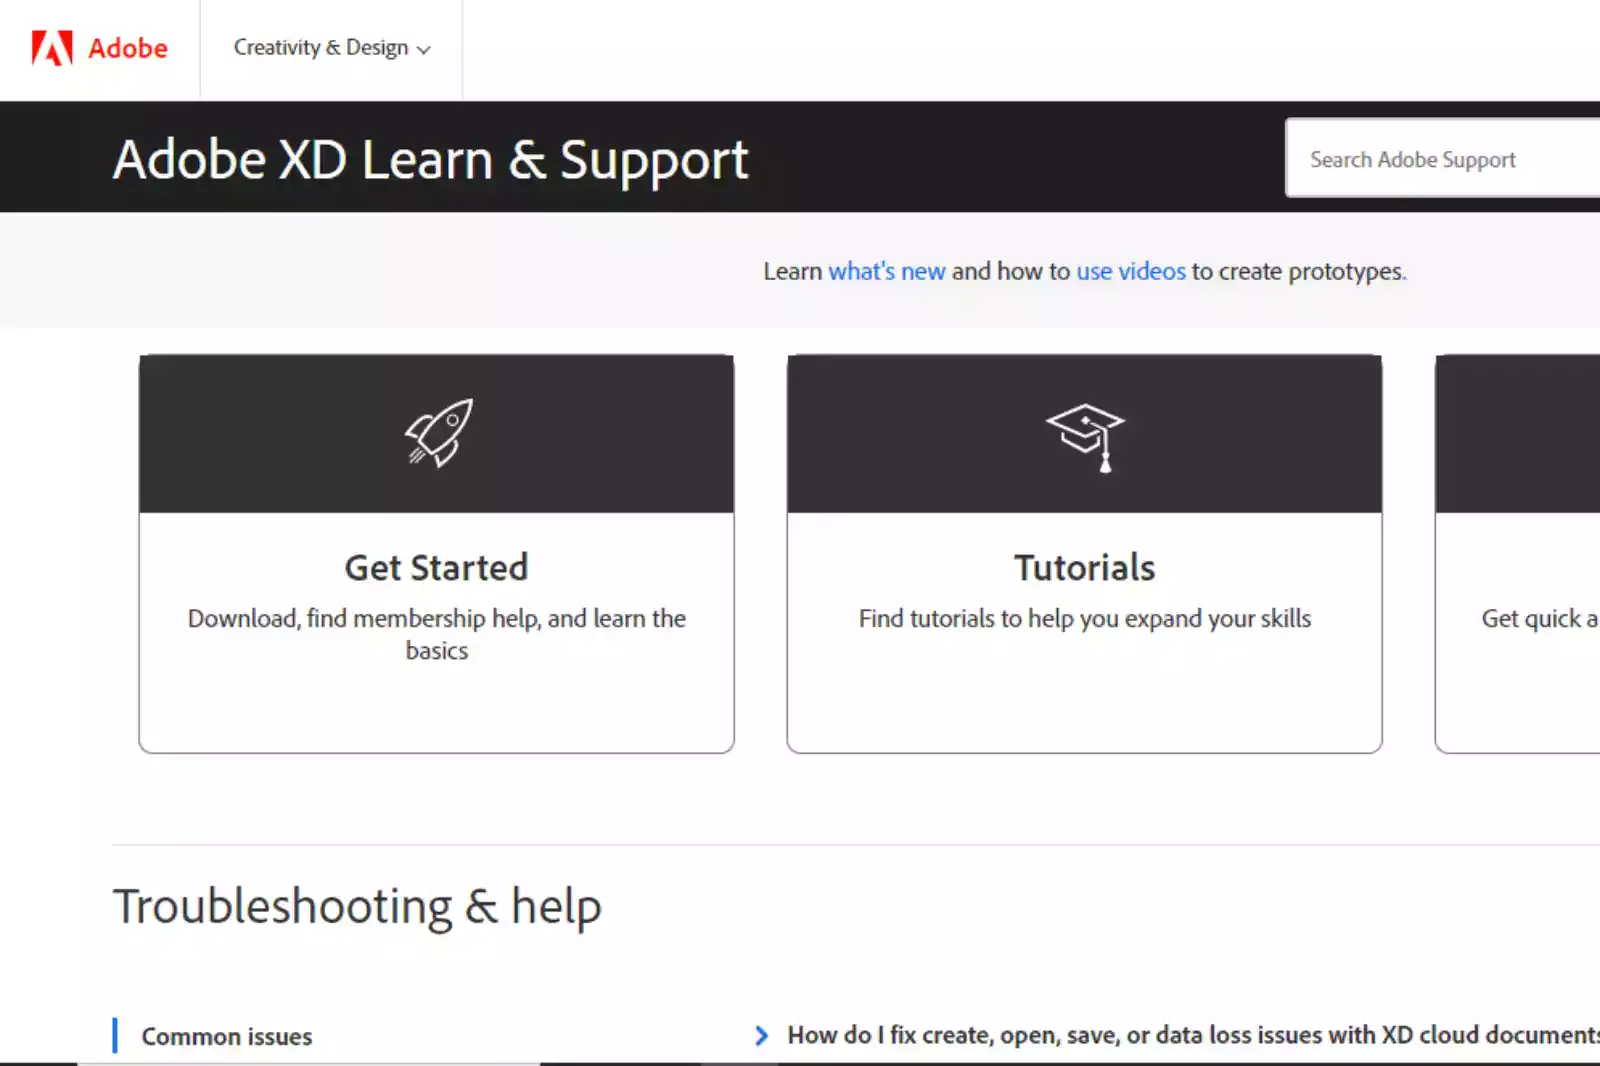 Home Page of Adobe XD